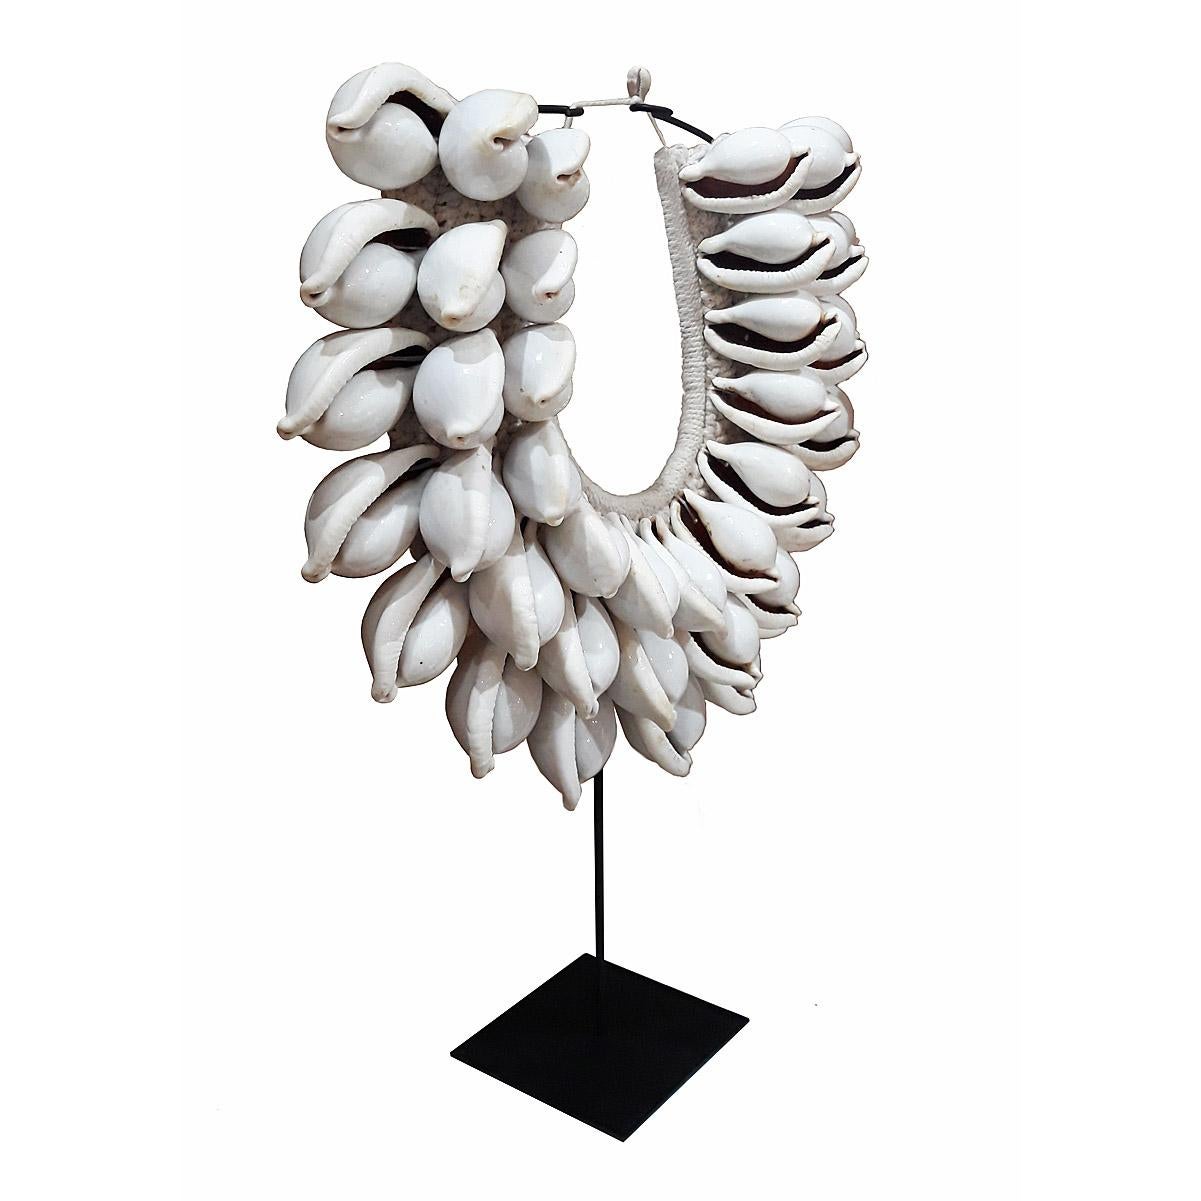 A decorative seashell necklace from Bali, Indonesia, contemporary. 

The large, white Egg Cowry shells are delicately attached to a handwoven cotton / raffia circular base. Mounted in a black metal stand. 

This species of sea snail which